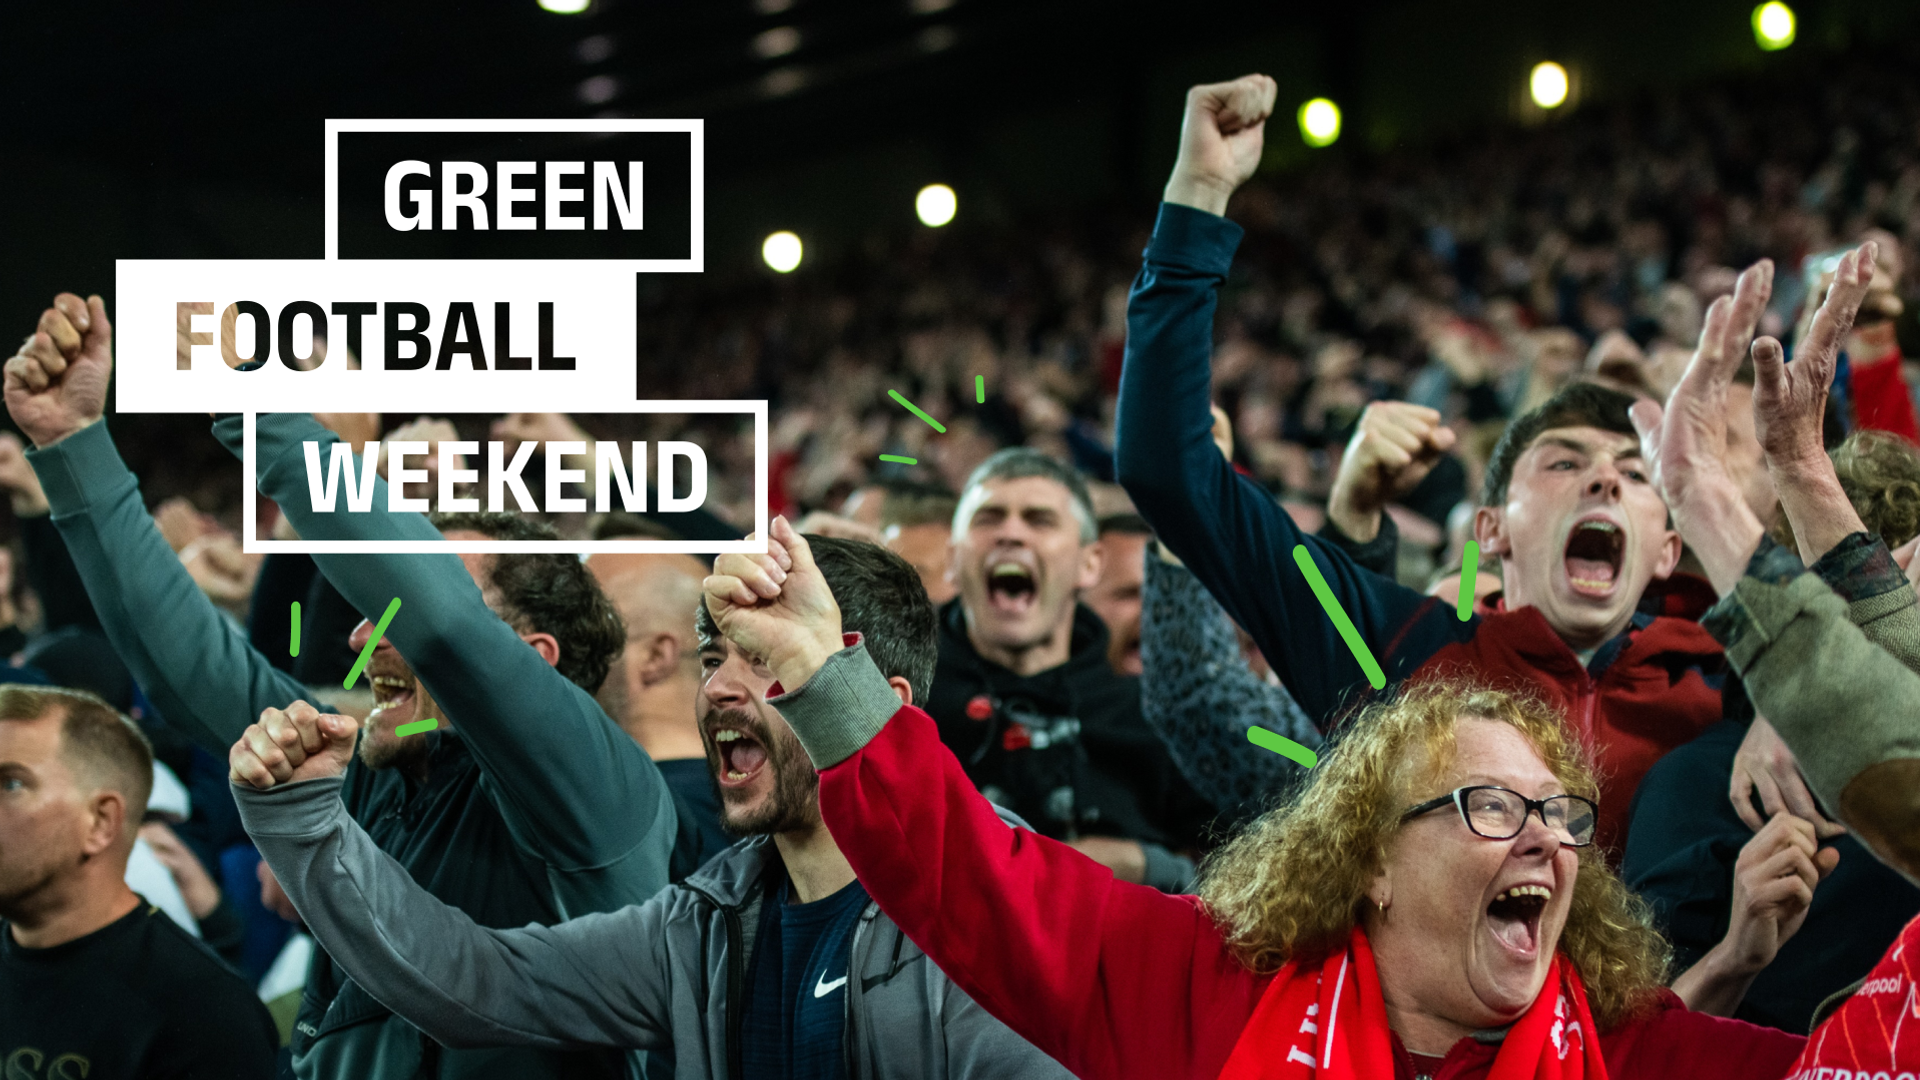 Green Football Weekend returns: Help your club fight against climate change